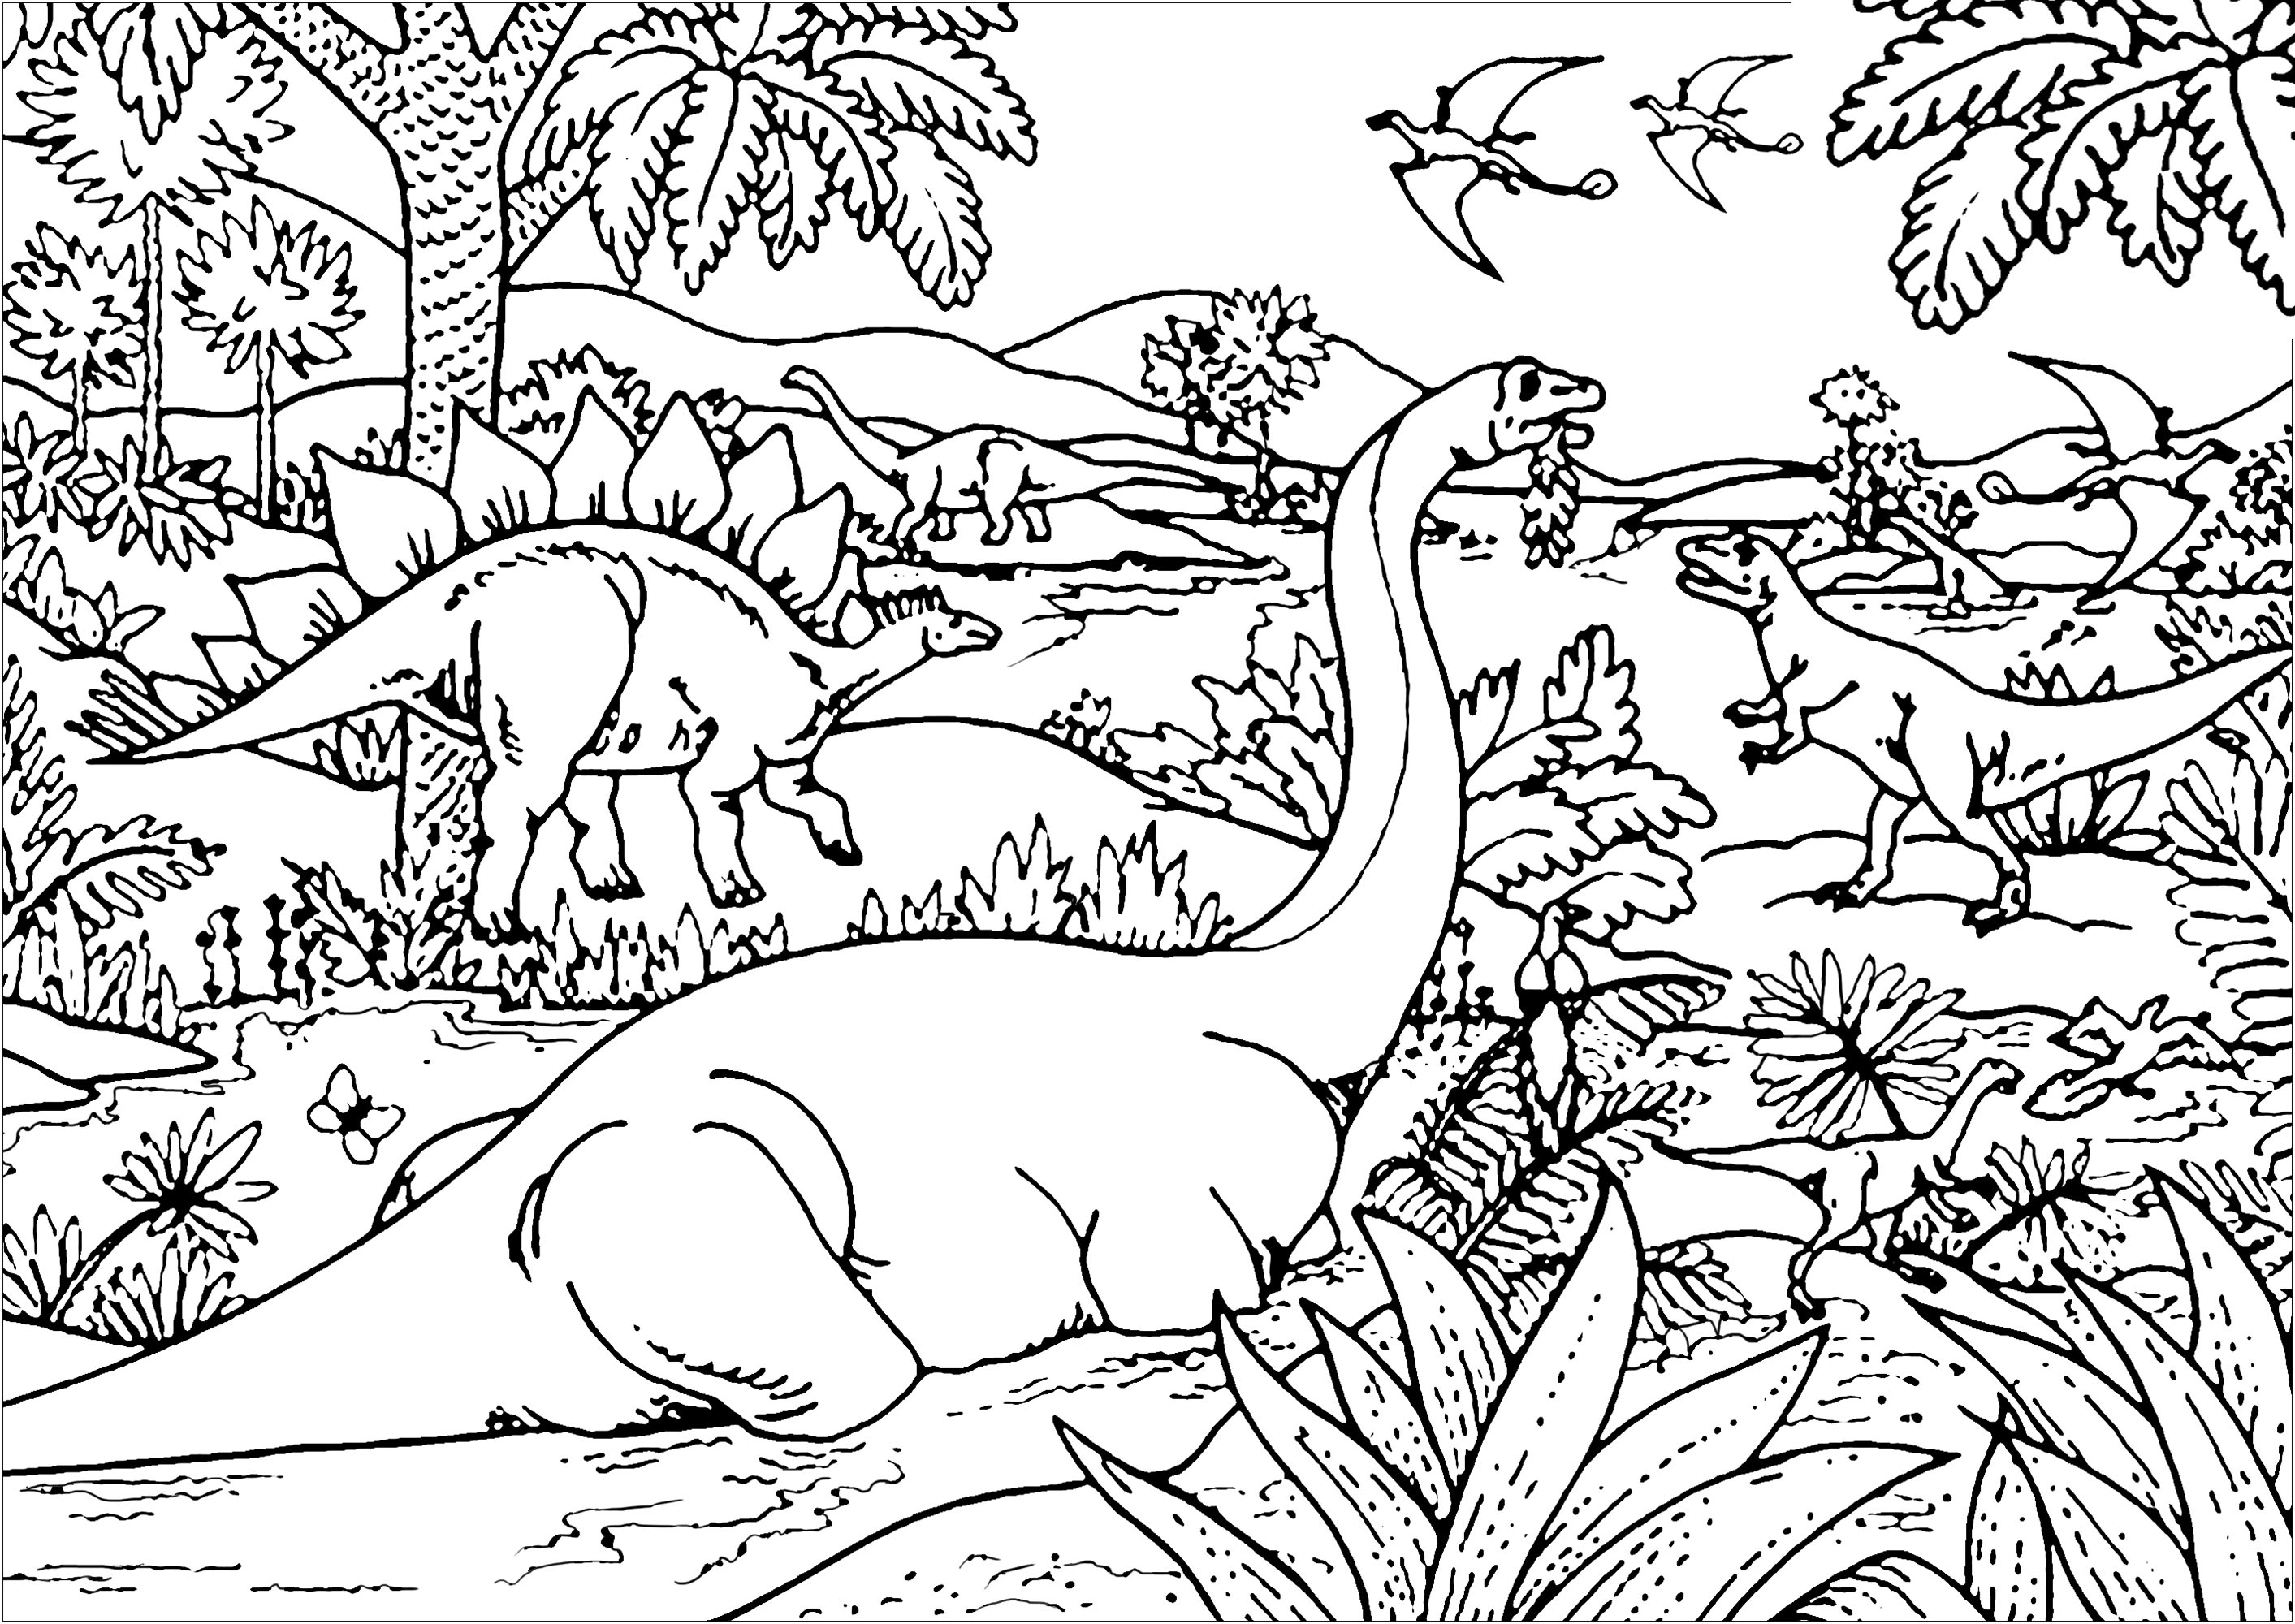 many-dinosaurs-in-a-plain-dinosaurs-adult-coloring-pages